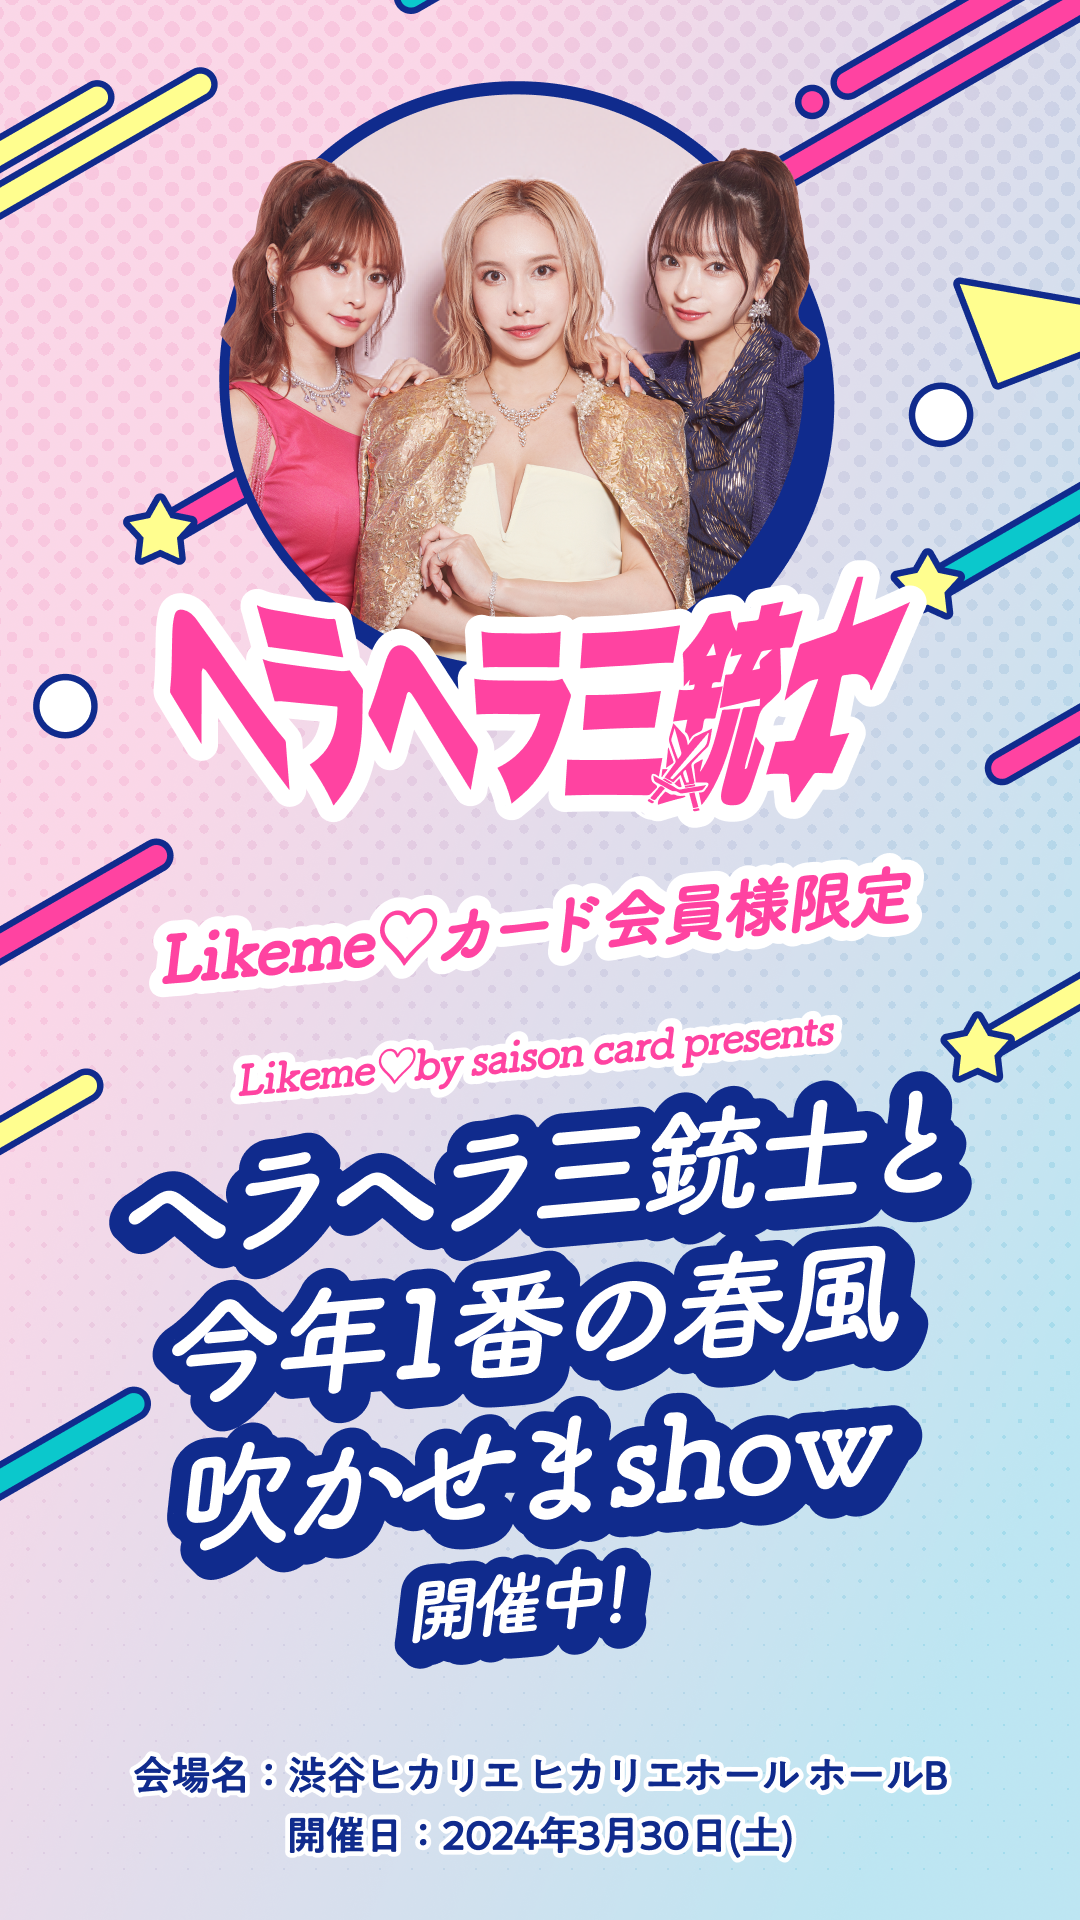 Likeme♡by saison card presents ヘラヘラ三銃士と今年1番の春風吹かせまshow